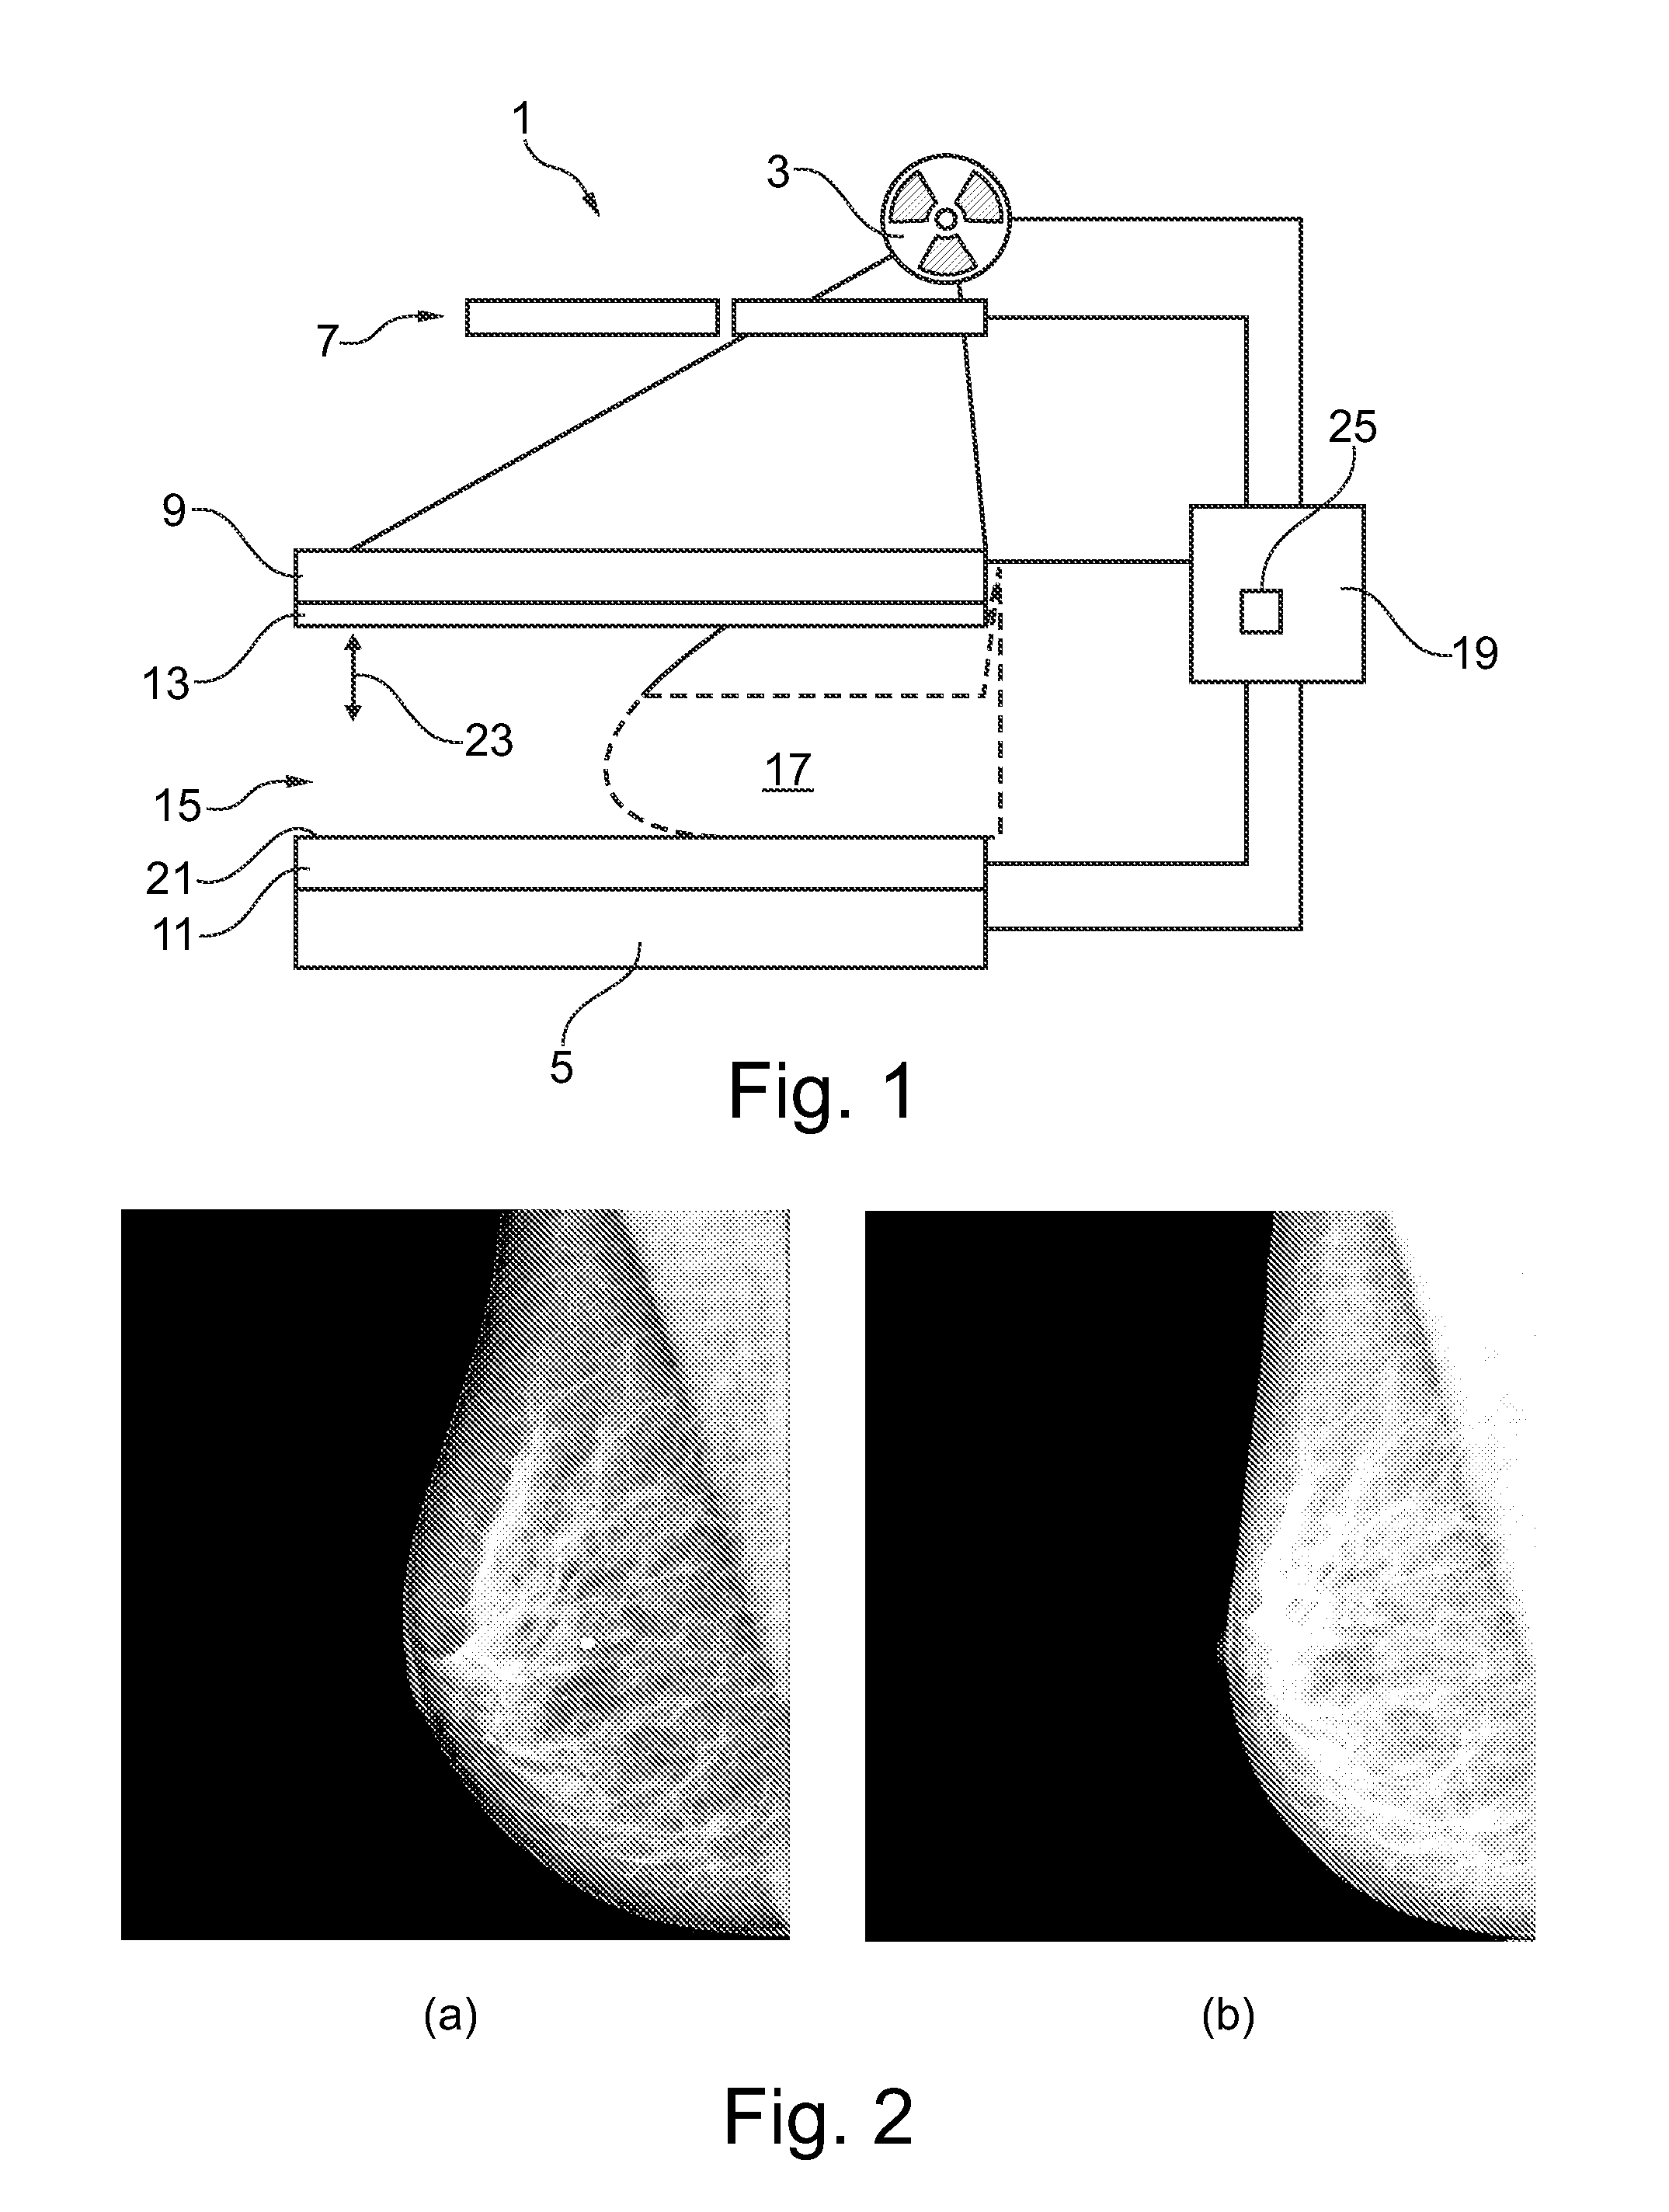 Method and device for imaging soft body tissue using x-ray projection and optical tomography